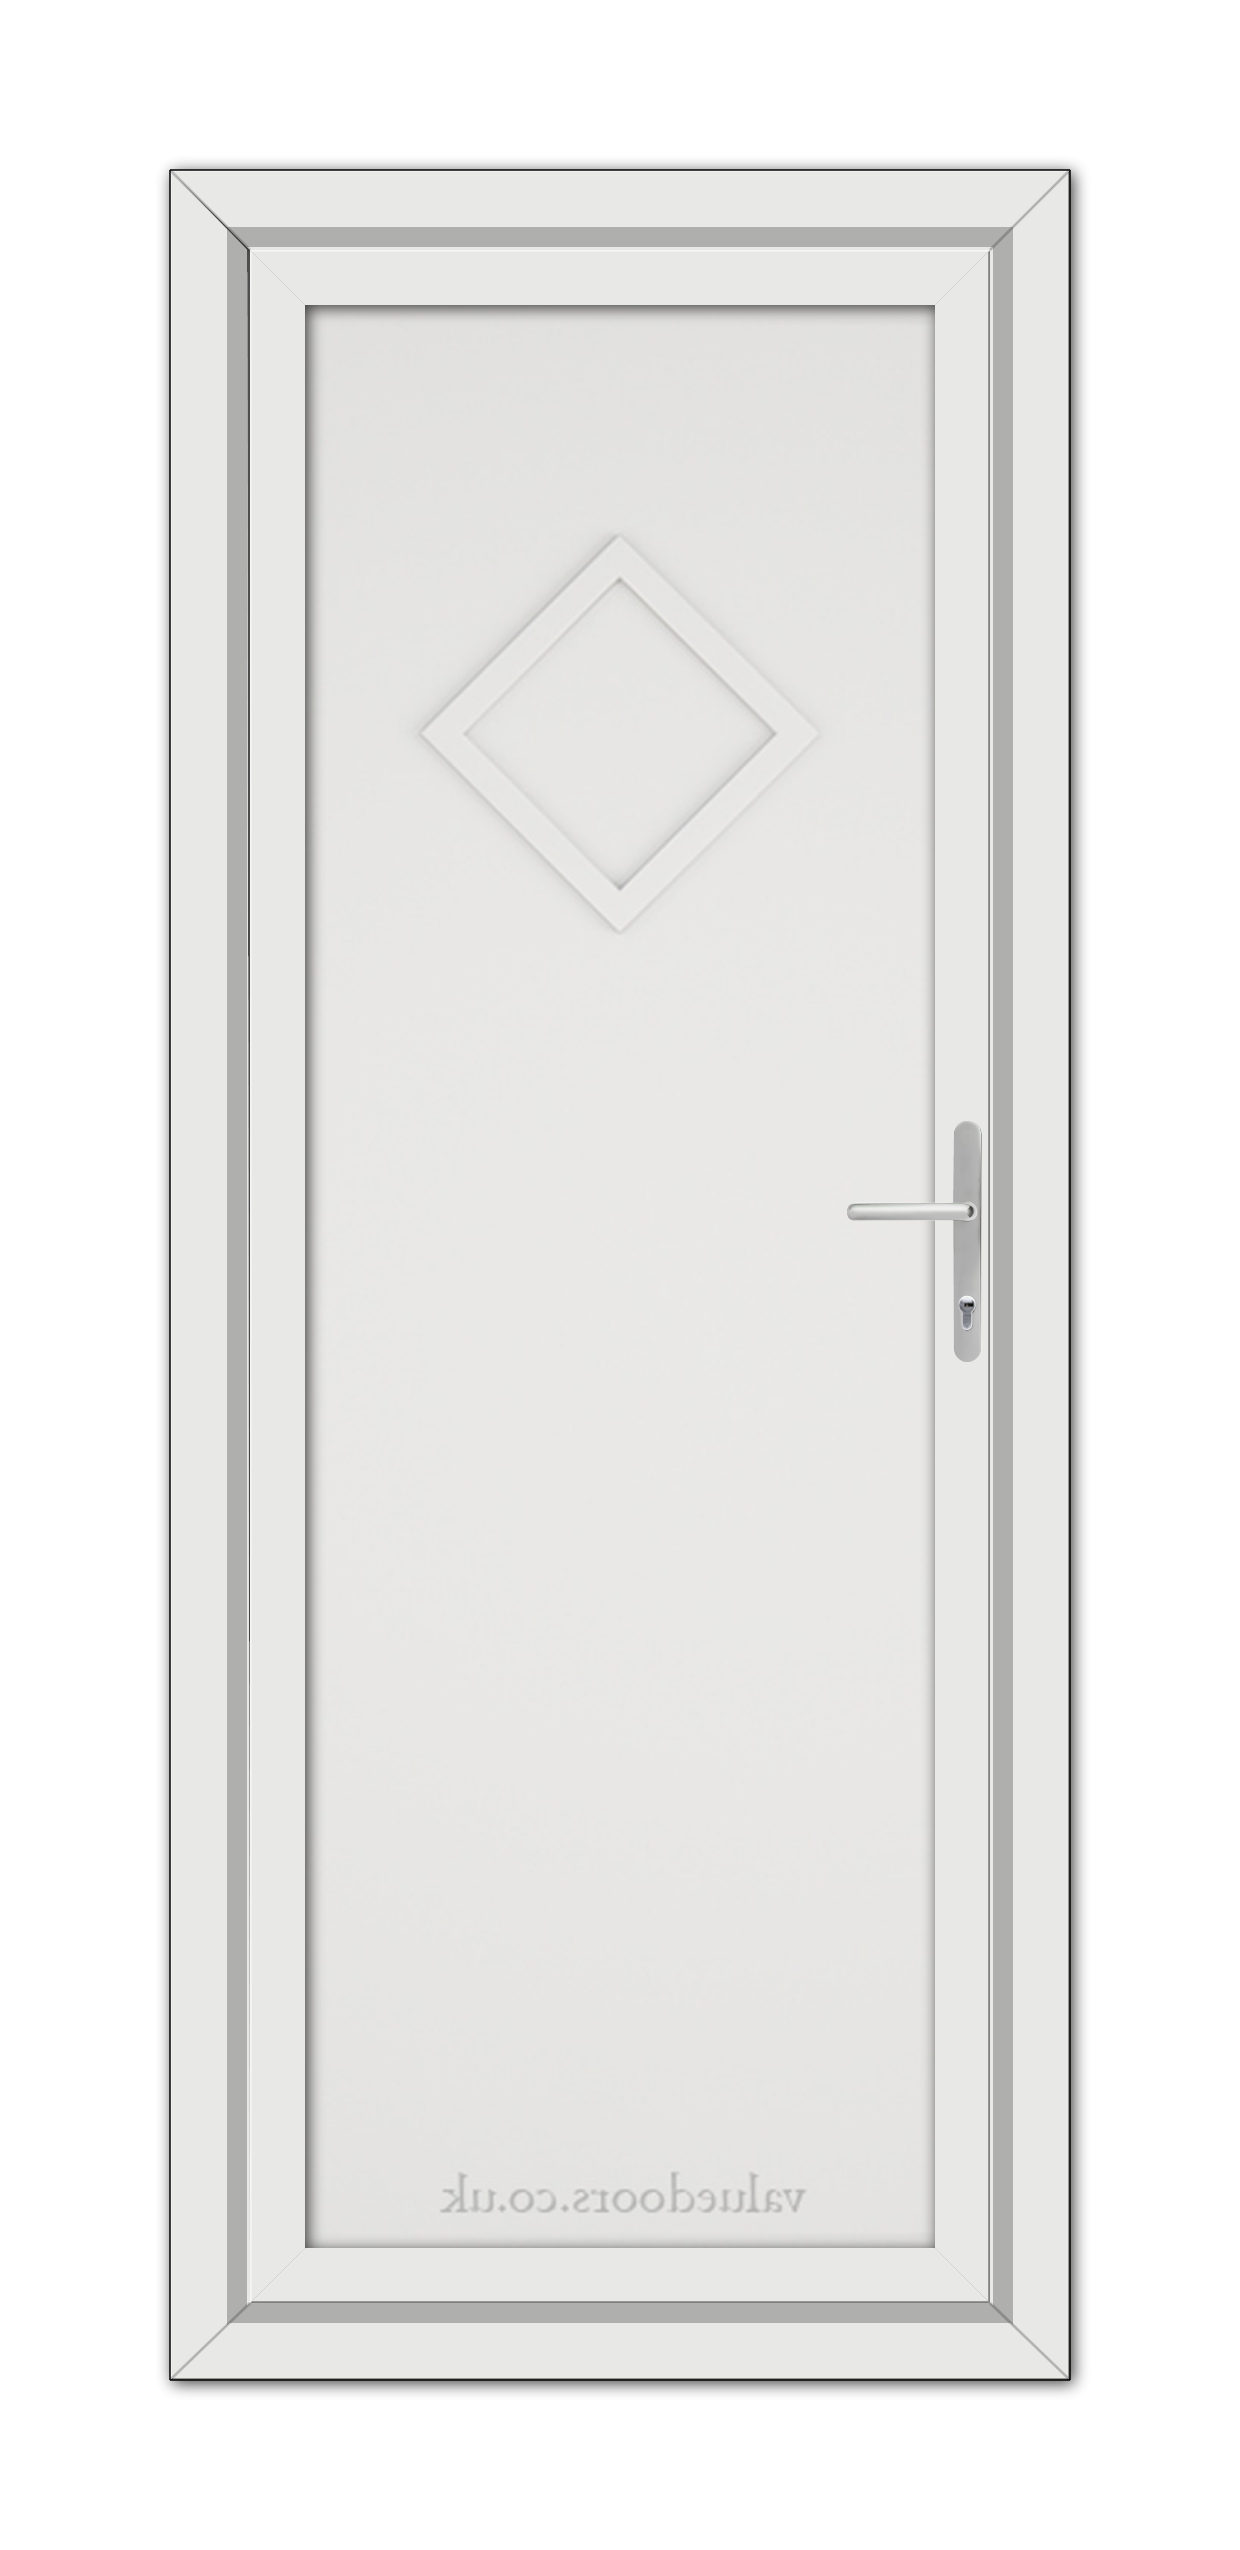 White Modern 5131 Solid uPVC Door with a diamond-shaped window and a silver handle, set in a grey frame.